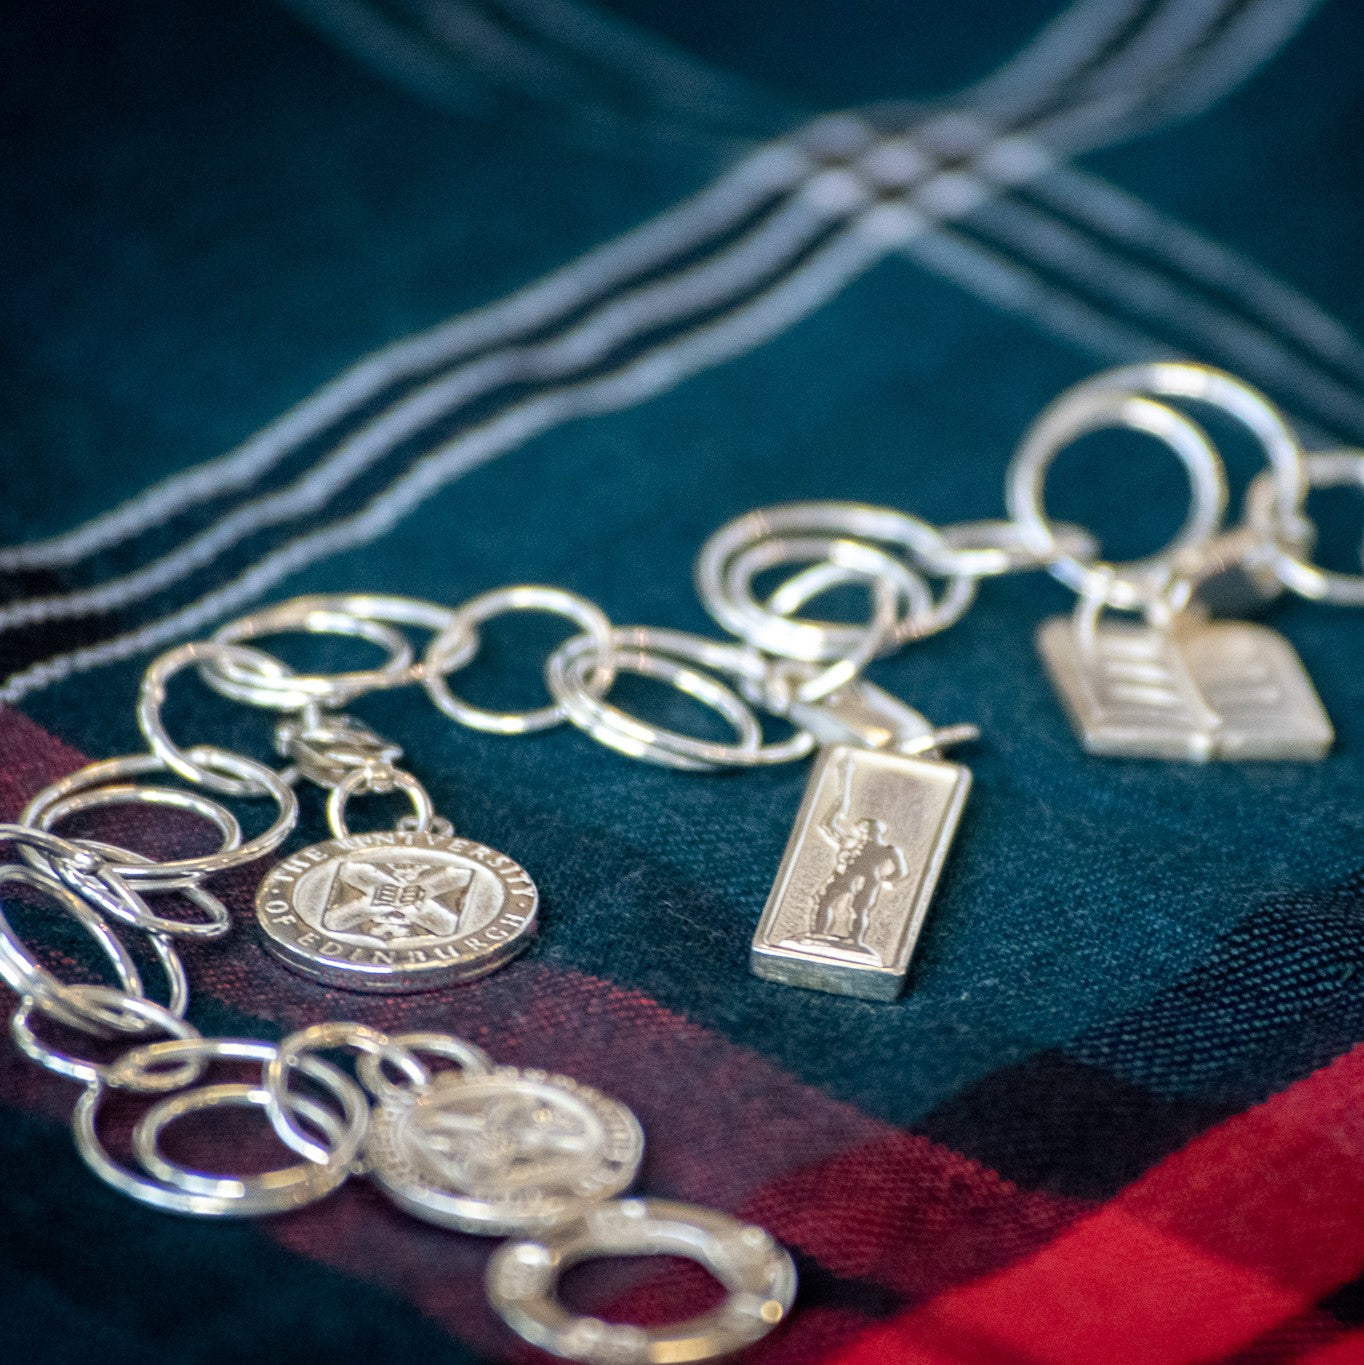 Our Silver Charm bracelet with Crest, Golden Boy and Book charms on a University Tartan background.